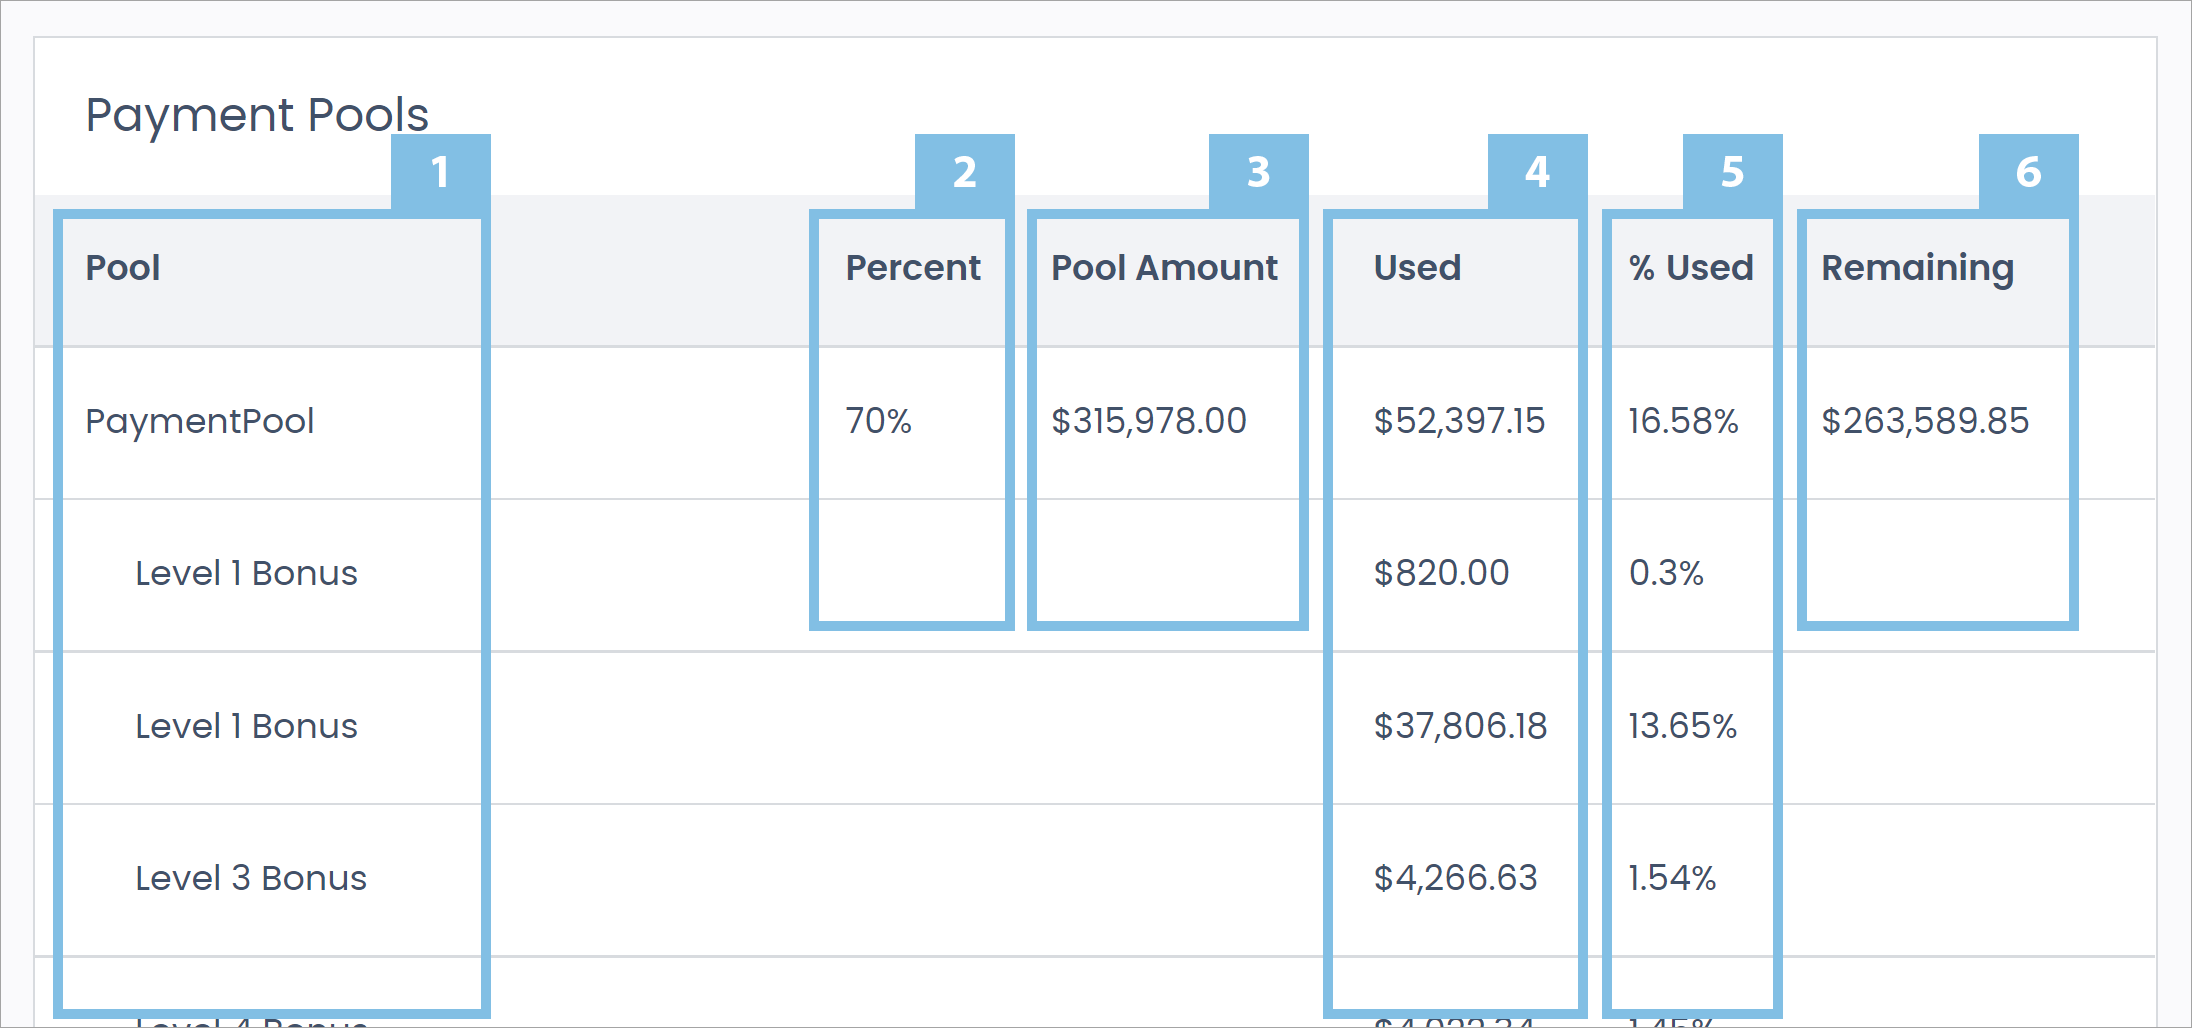 Payment Pools